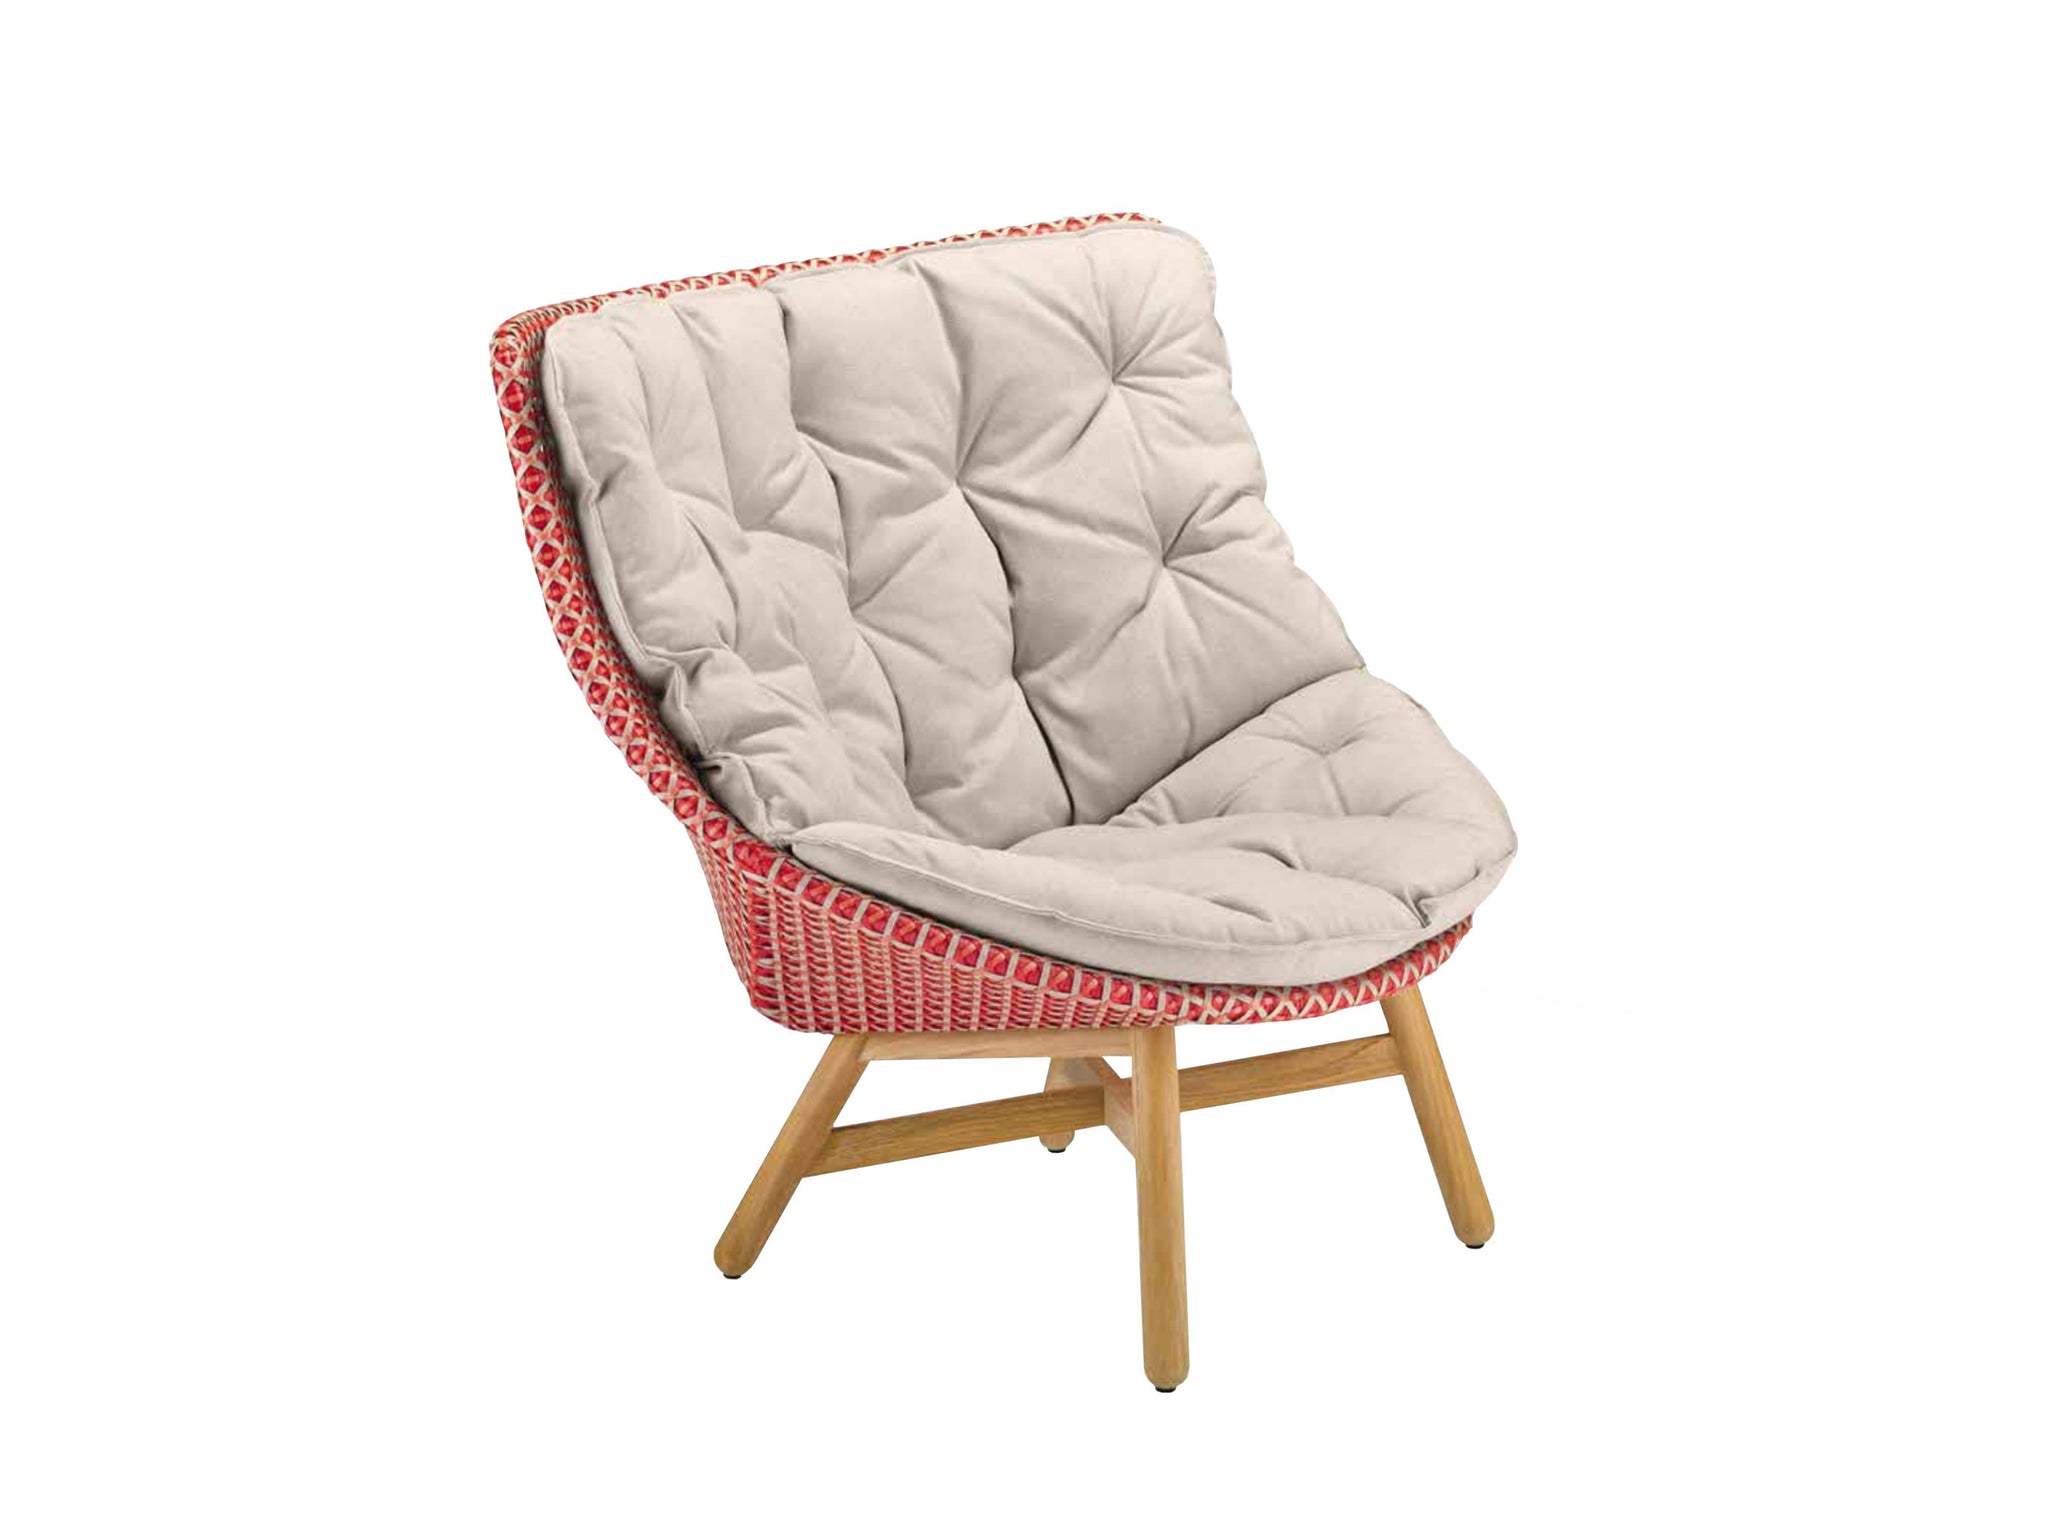 Mbrace-wing-chair-dedon